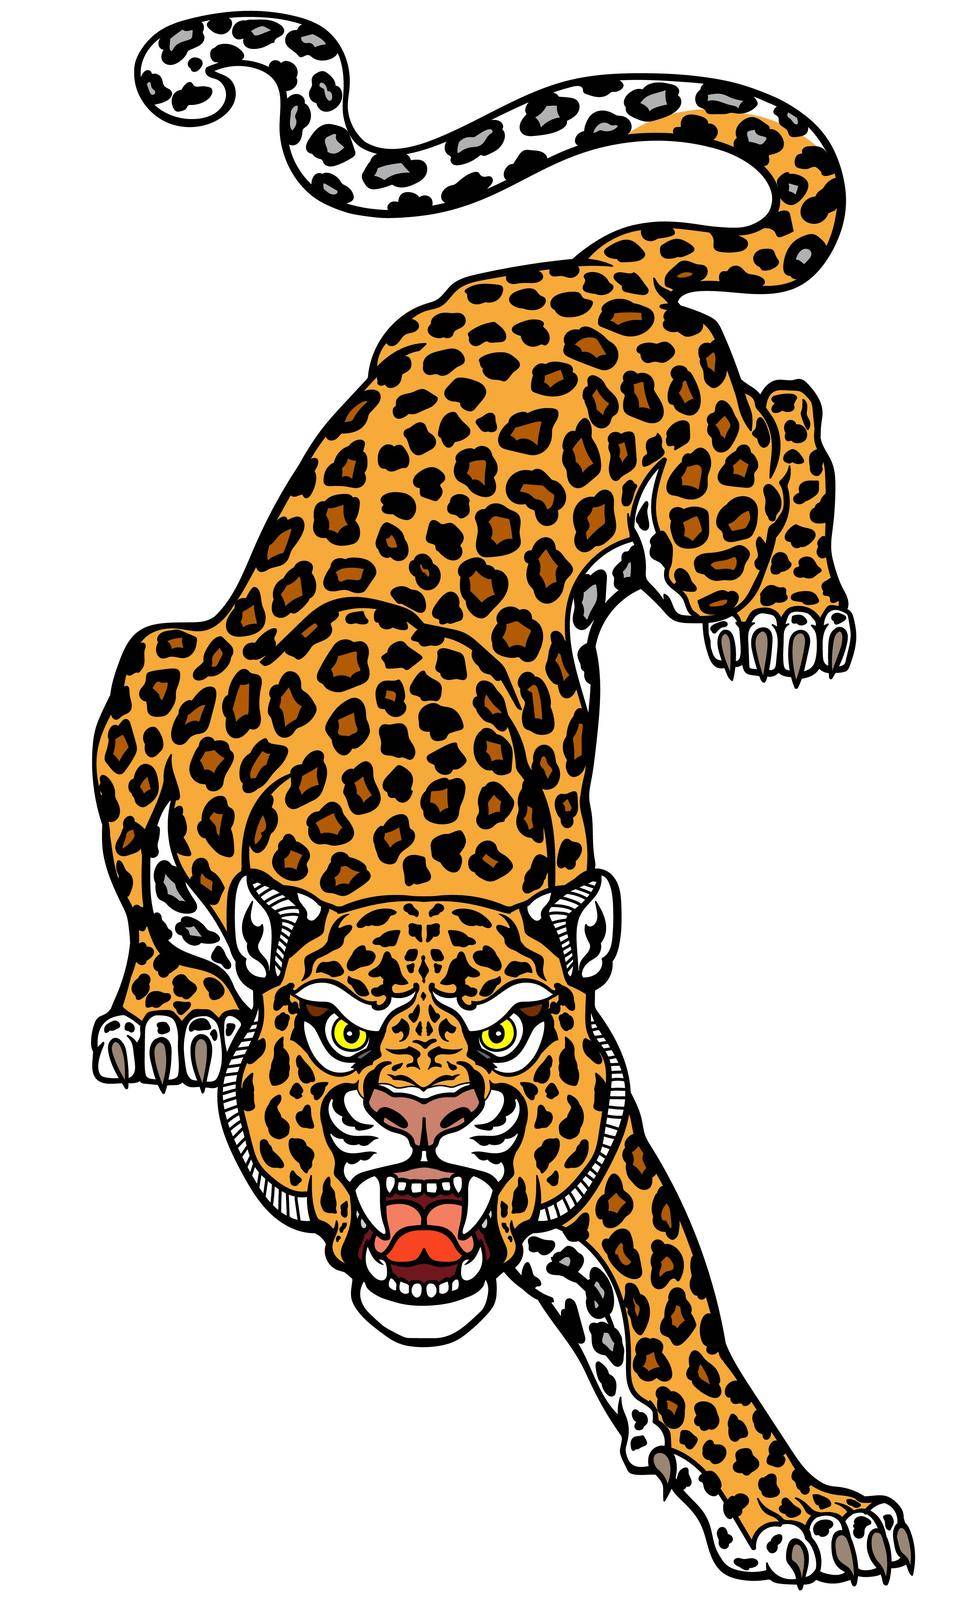 The roaring leopard climbs down looking straight ahead. Crawling spotted panther. Aggressive big cat. Front view. Tattoo style vector illustration